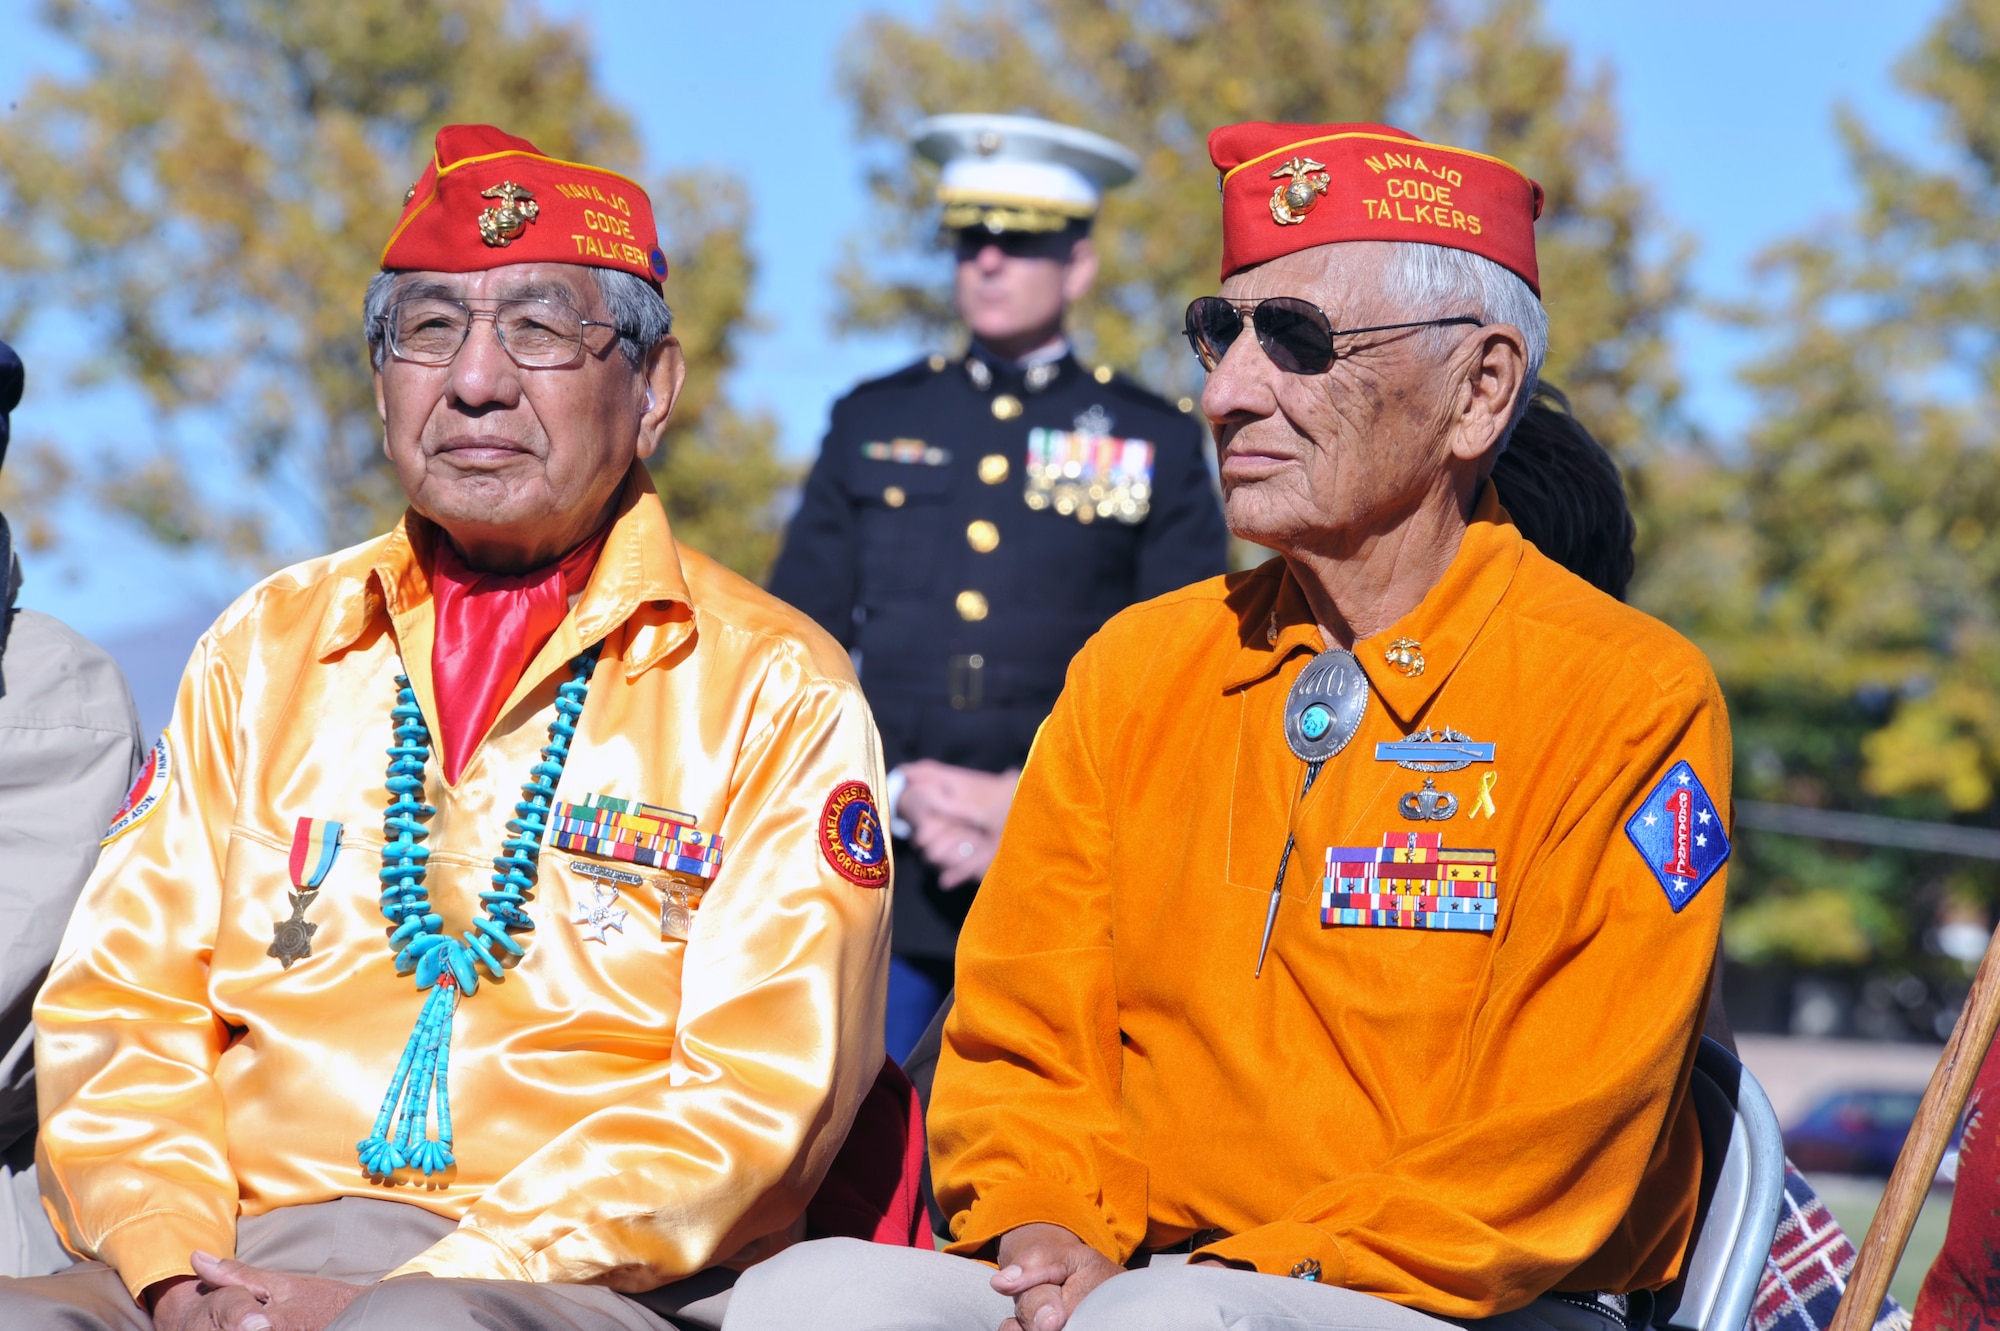 Navajo Code Talkers Peter Macdonald (left) and Roy Hawthorne participated in a ceremony Nov. 10, 2010, at Kirtland Air Force Base, N.M. to pay tribute to veterans and to celebrate Native American Heritage Month. (U.S. Air Force photo)